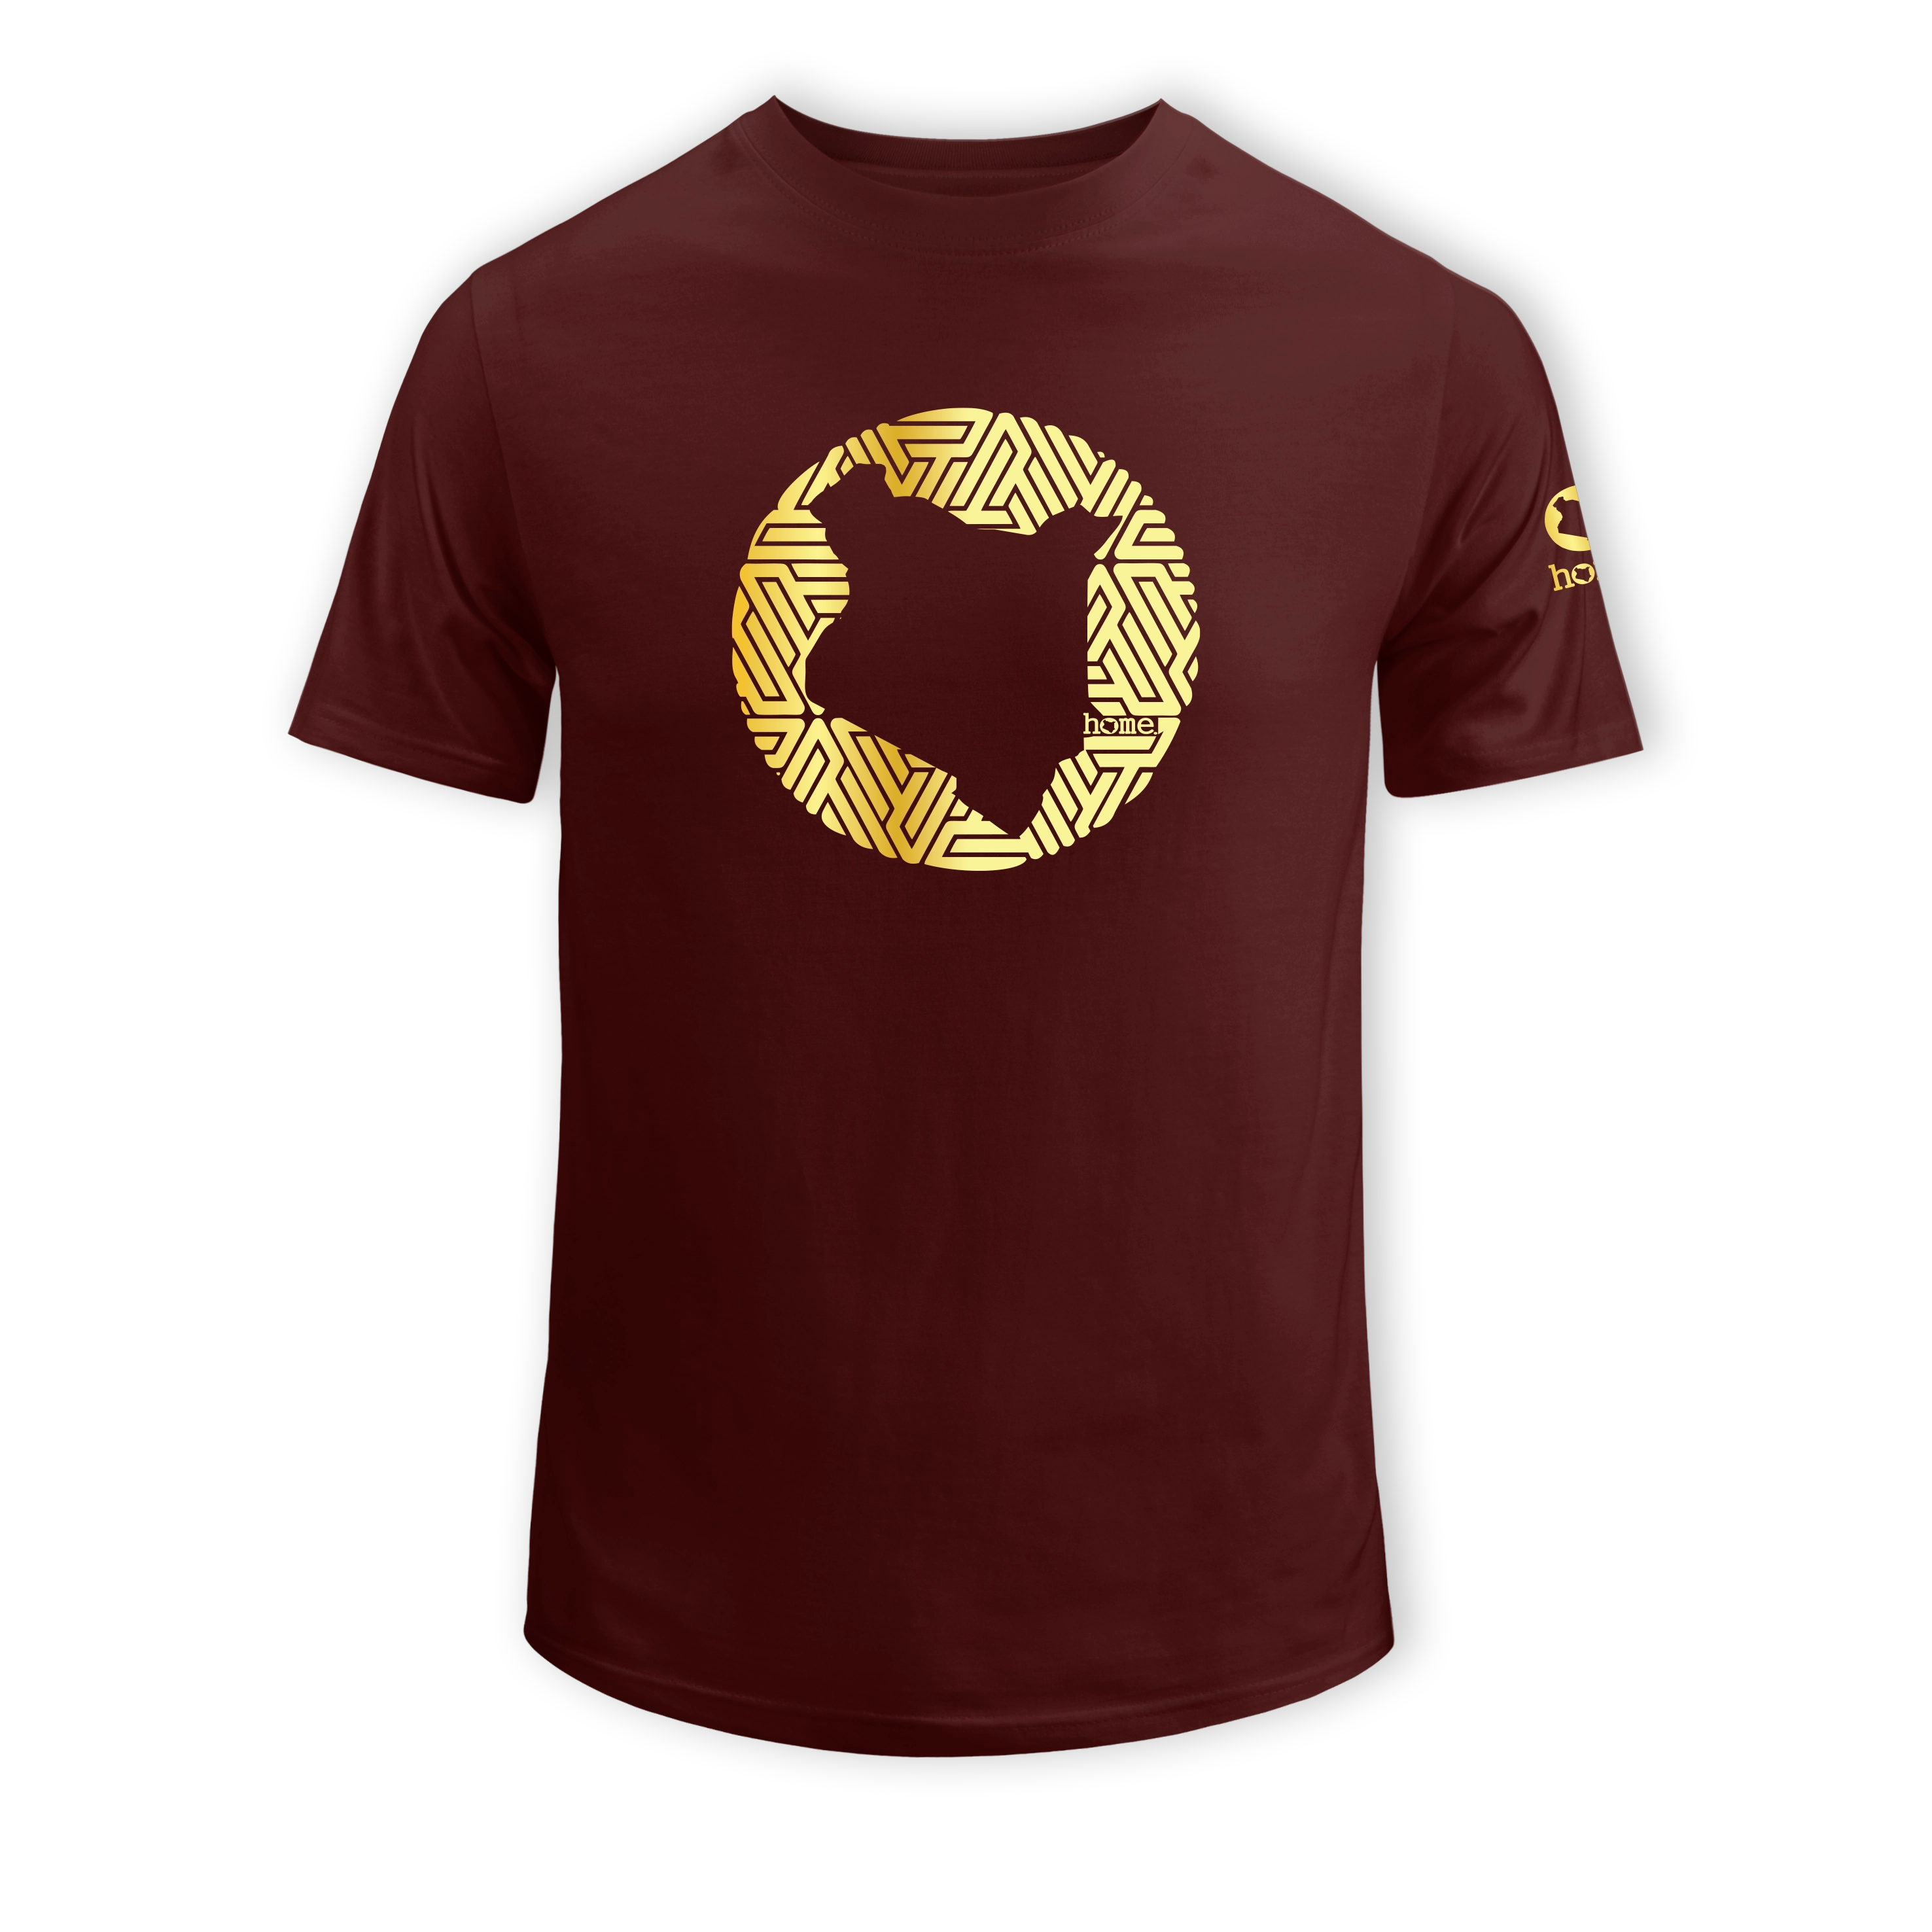 home_254 SHORT-SLEEVED MAROON T-SHIRT WITH A MAP GOLD PRINT – COTTON PLUS FABRIC